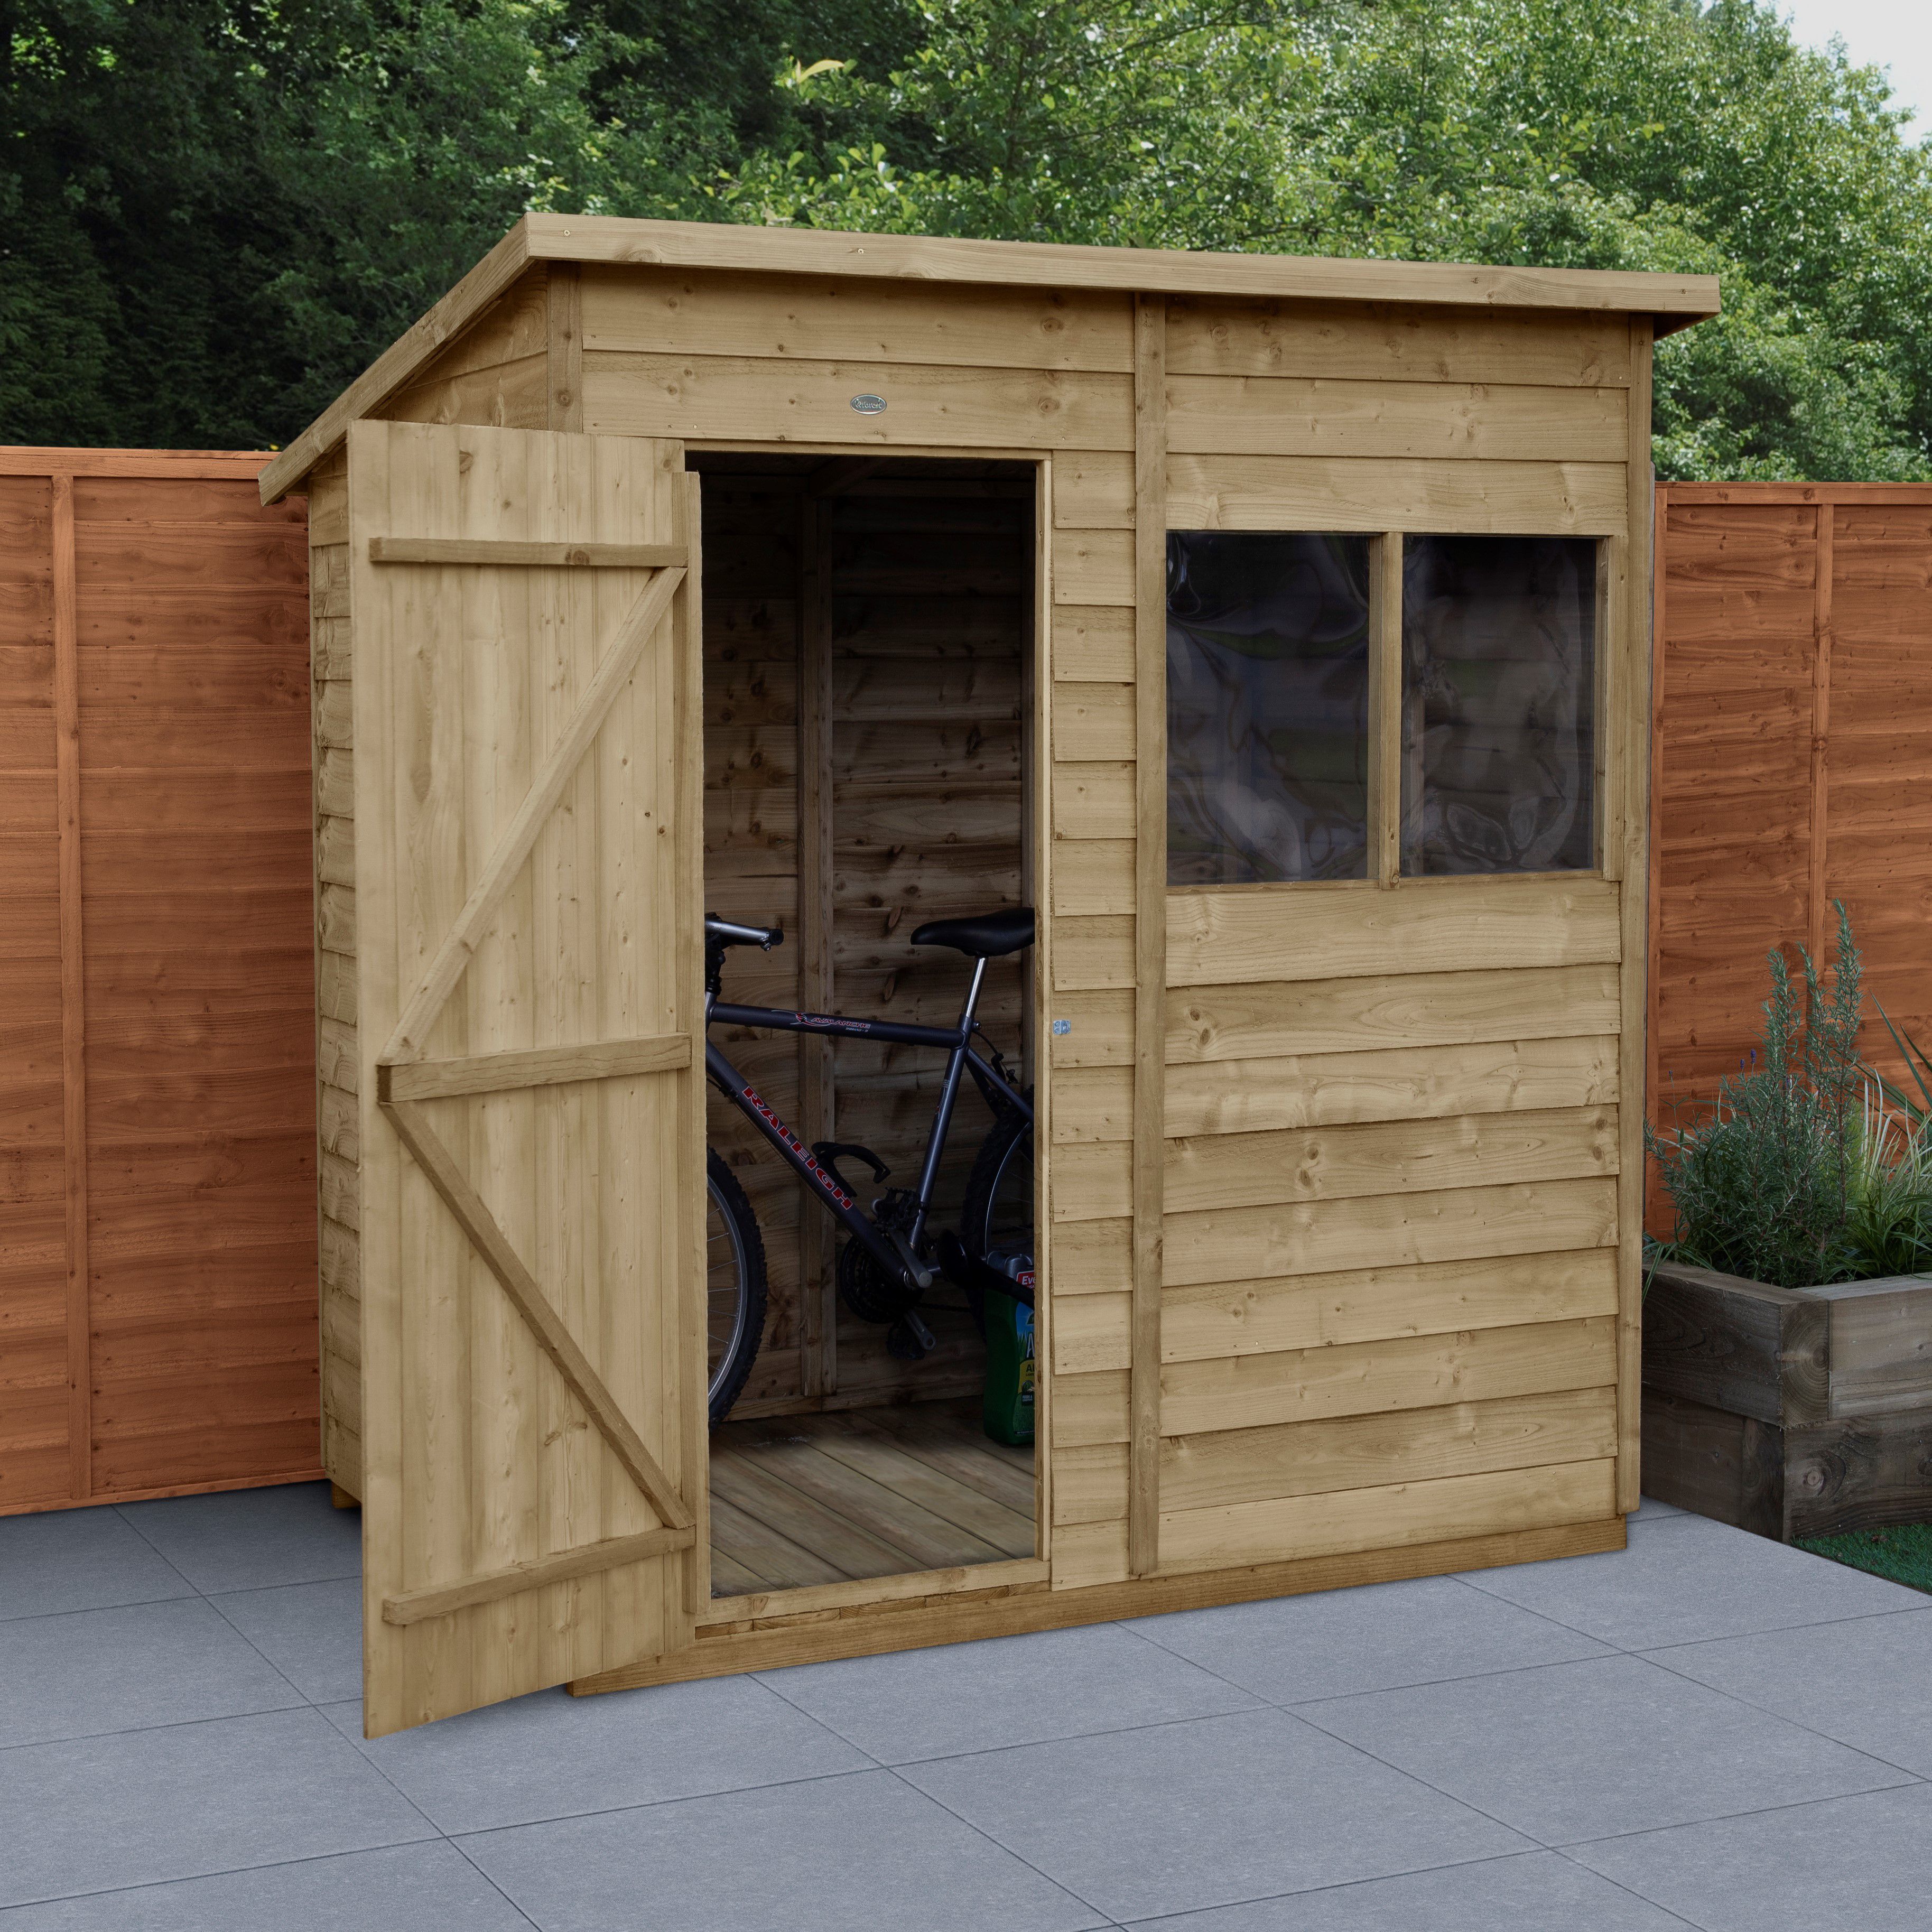 forest garden 6x4 pent overlap wooden shed base included